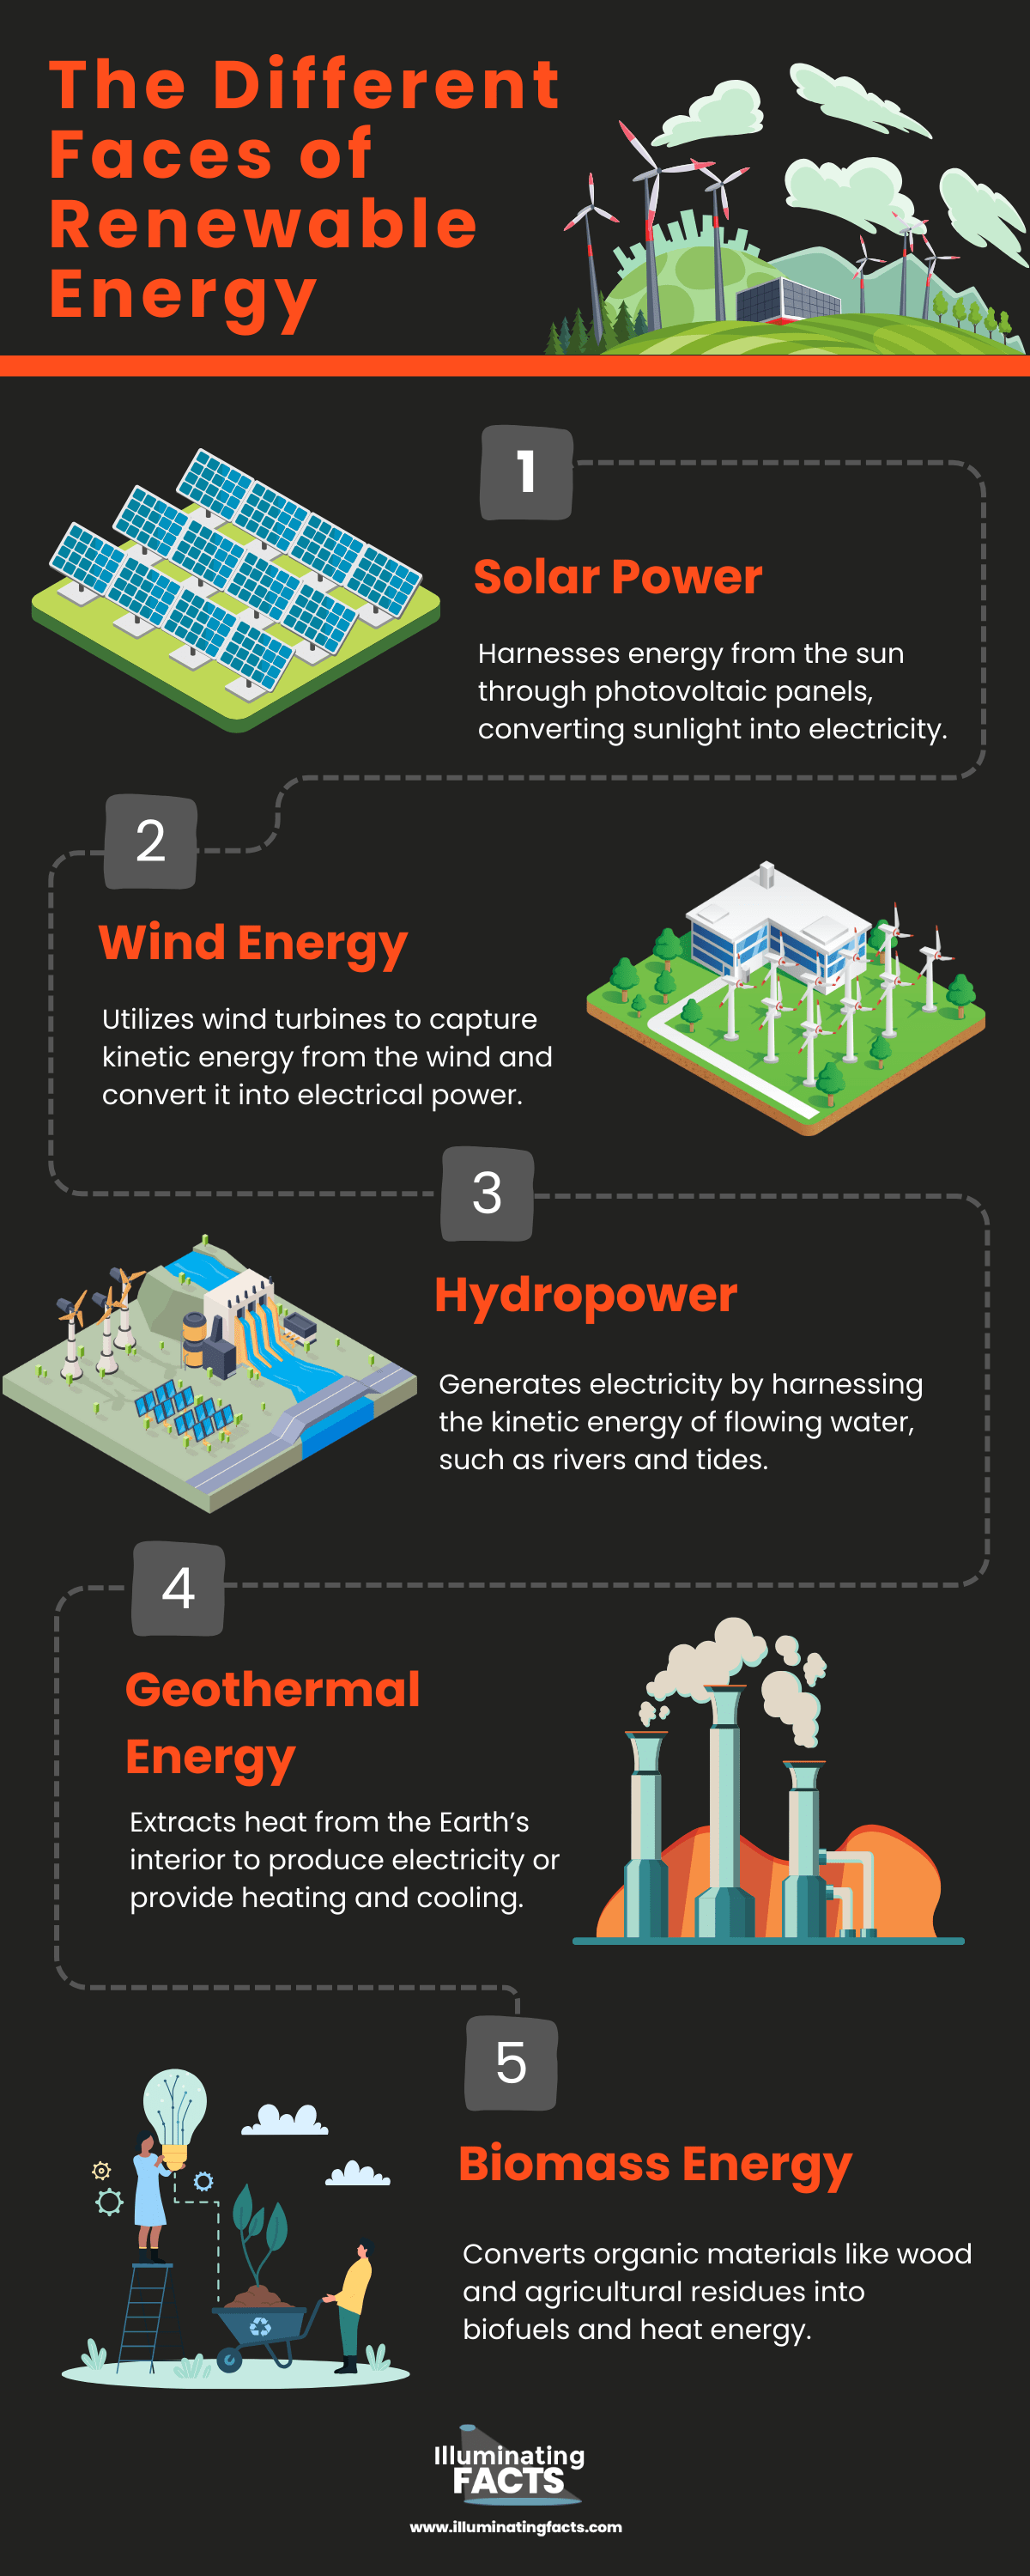 The Different Faces of Renewable Energy 